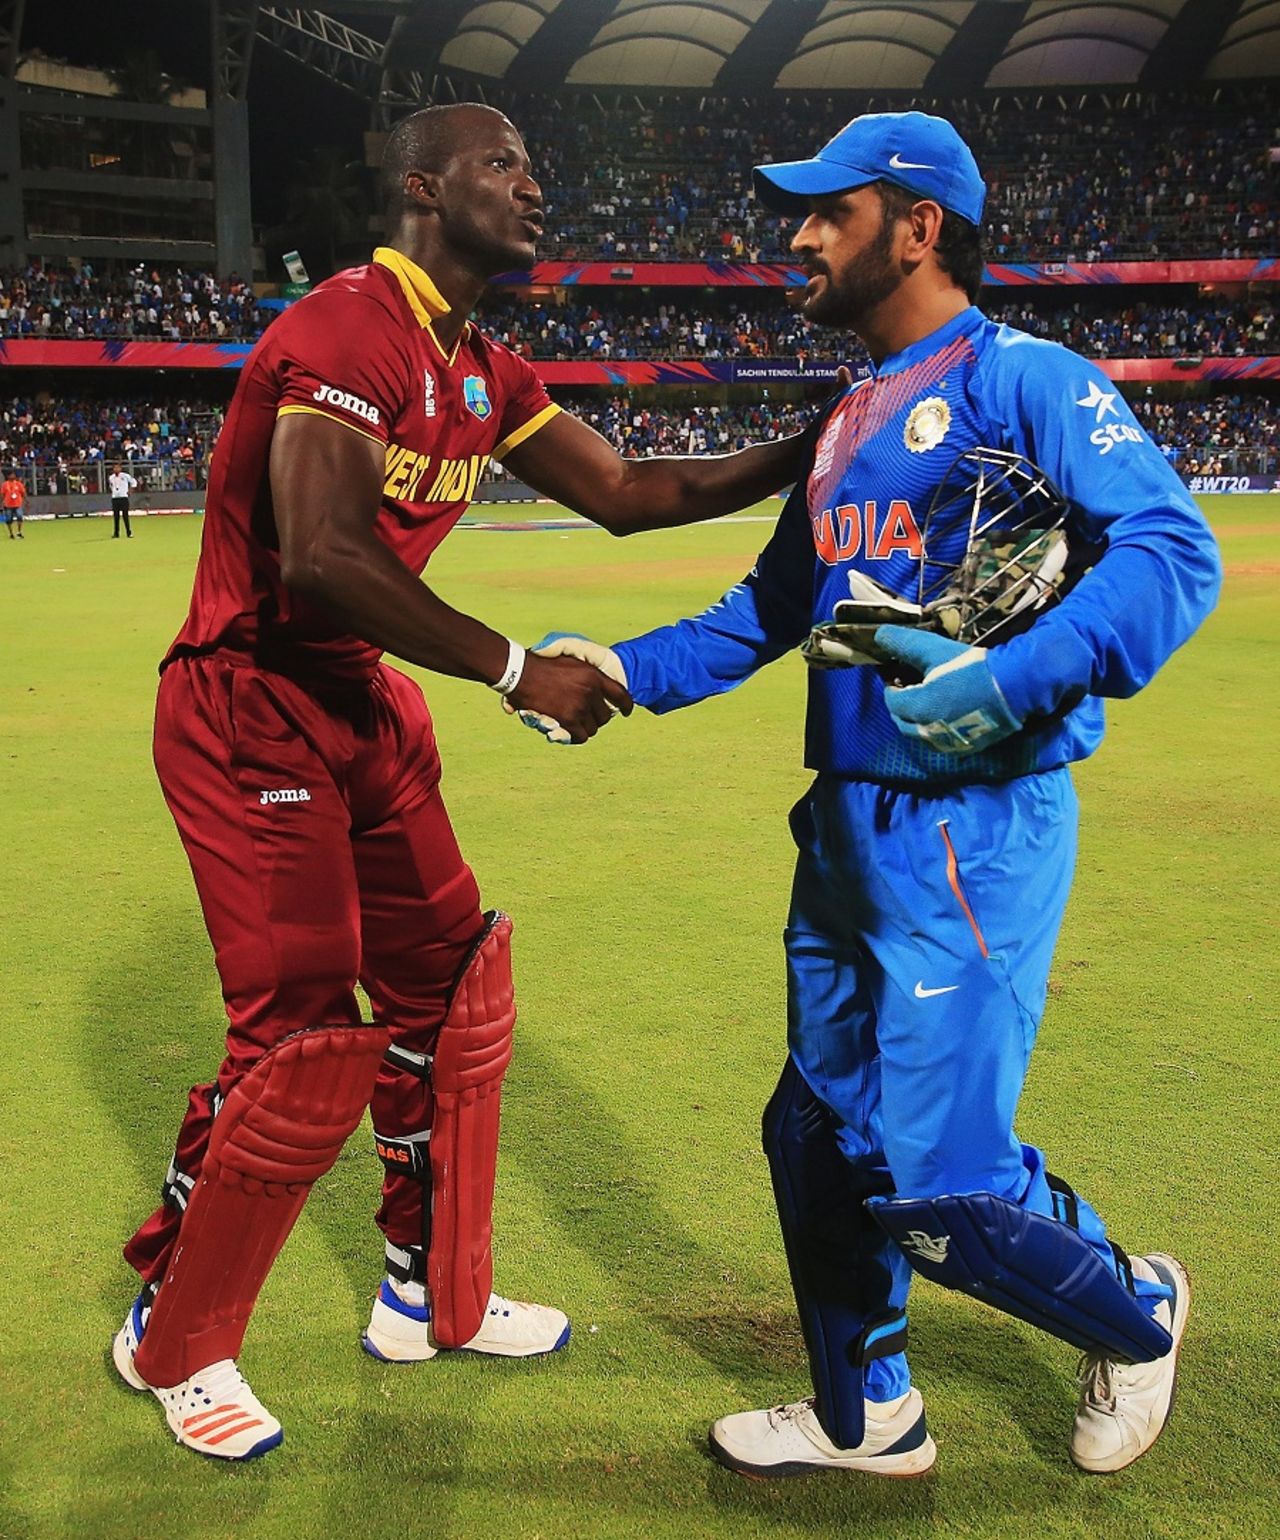 MS Dhoni and Darren Sammy greet each other after the match, India v West Indies, World T20 2016, semi-final, Mumbai, March 31, 2016